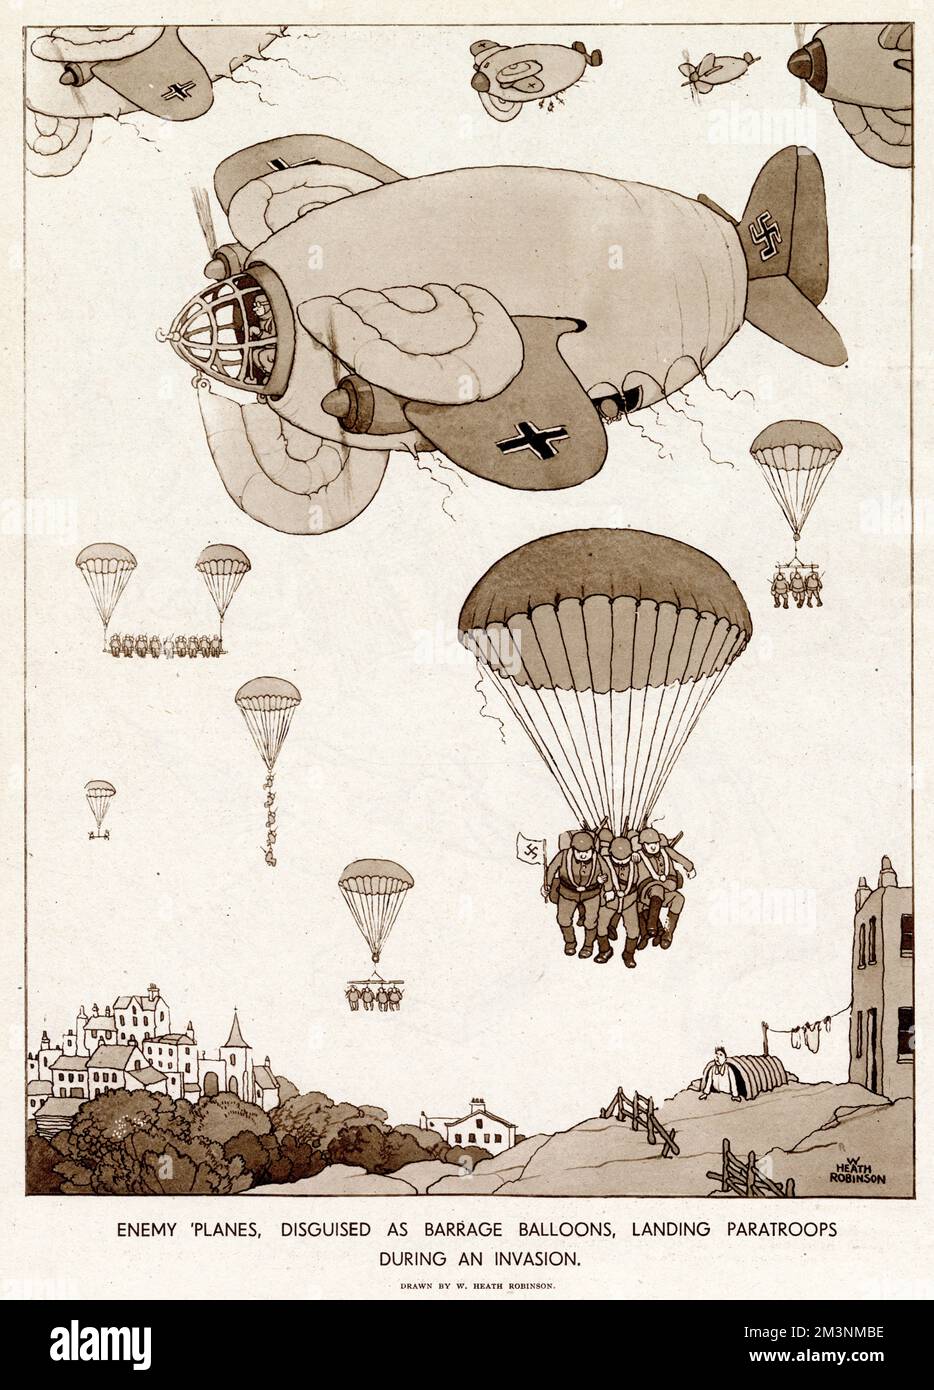 Enemy barrage balloons/planes landing parachutist in large clusters onto an unsuspecting town.      Date: 1941 Stock Photo